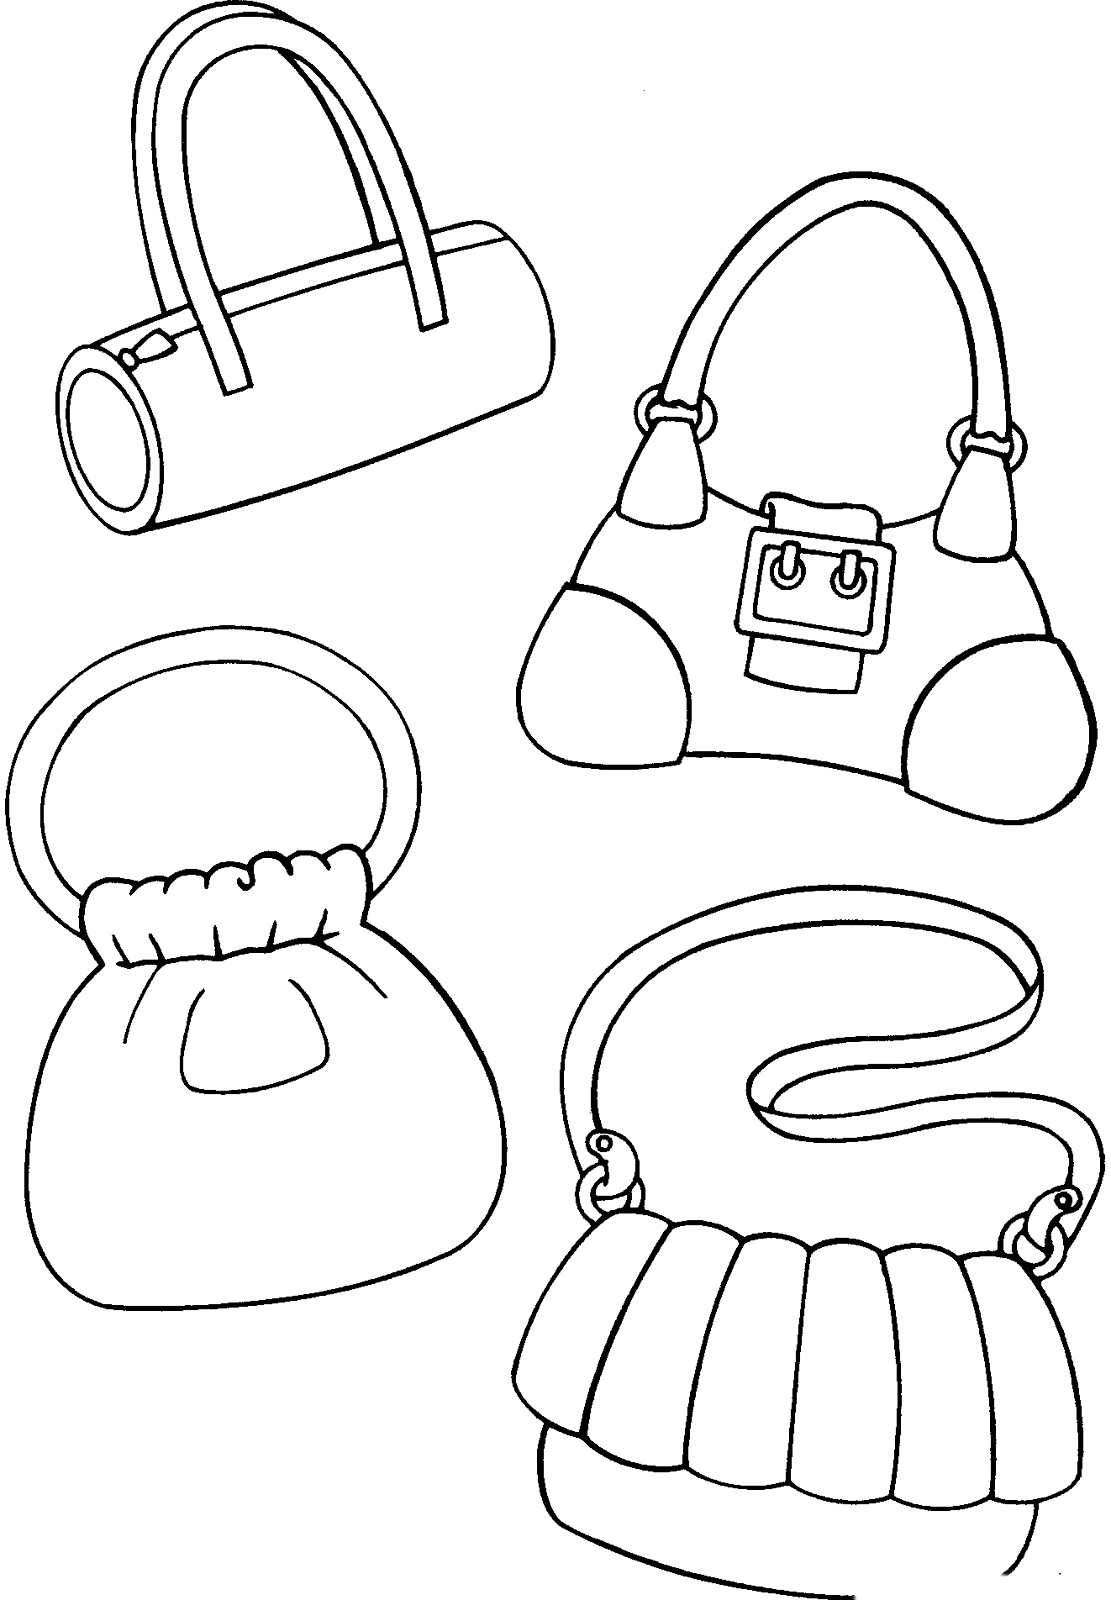 Download Coloring page - Glamorous accessories